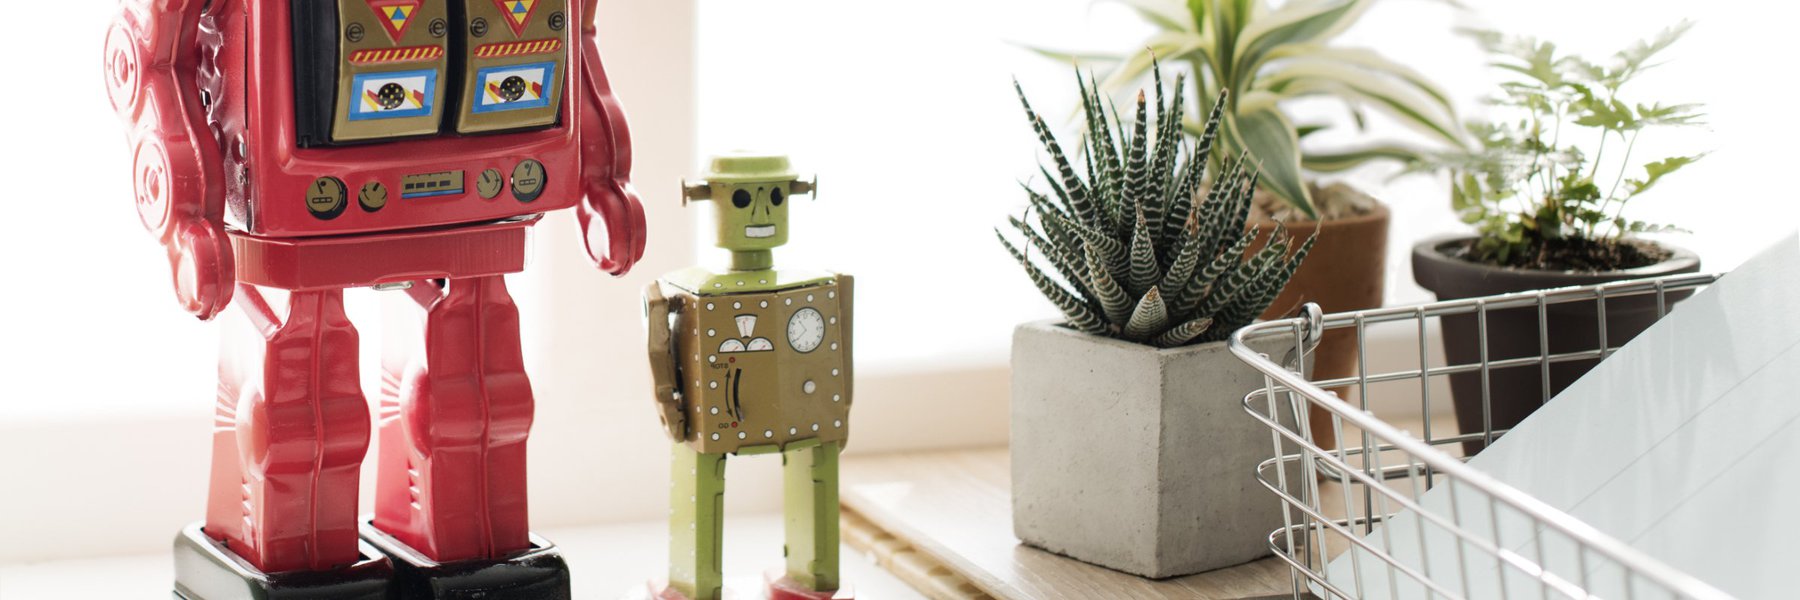 A small green robot, overlooking some paperwork, perhaps about to file a FOIA request. Cut off is a larger red robot standing next to it, perhaps getting ready to file a FOIA appeal.